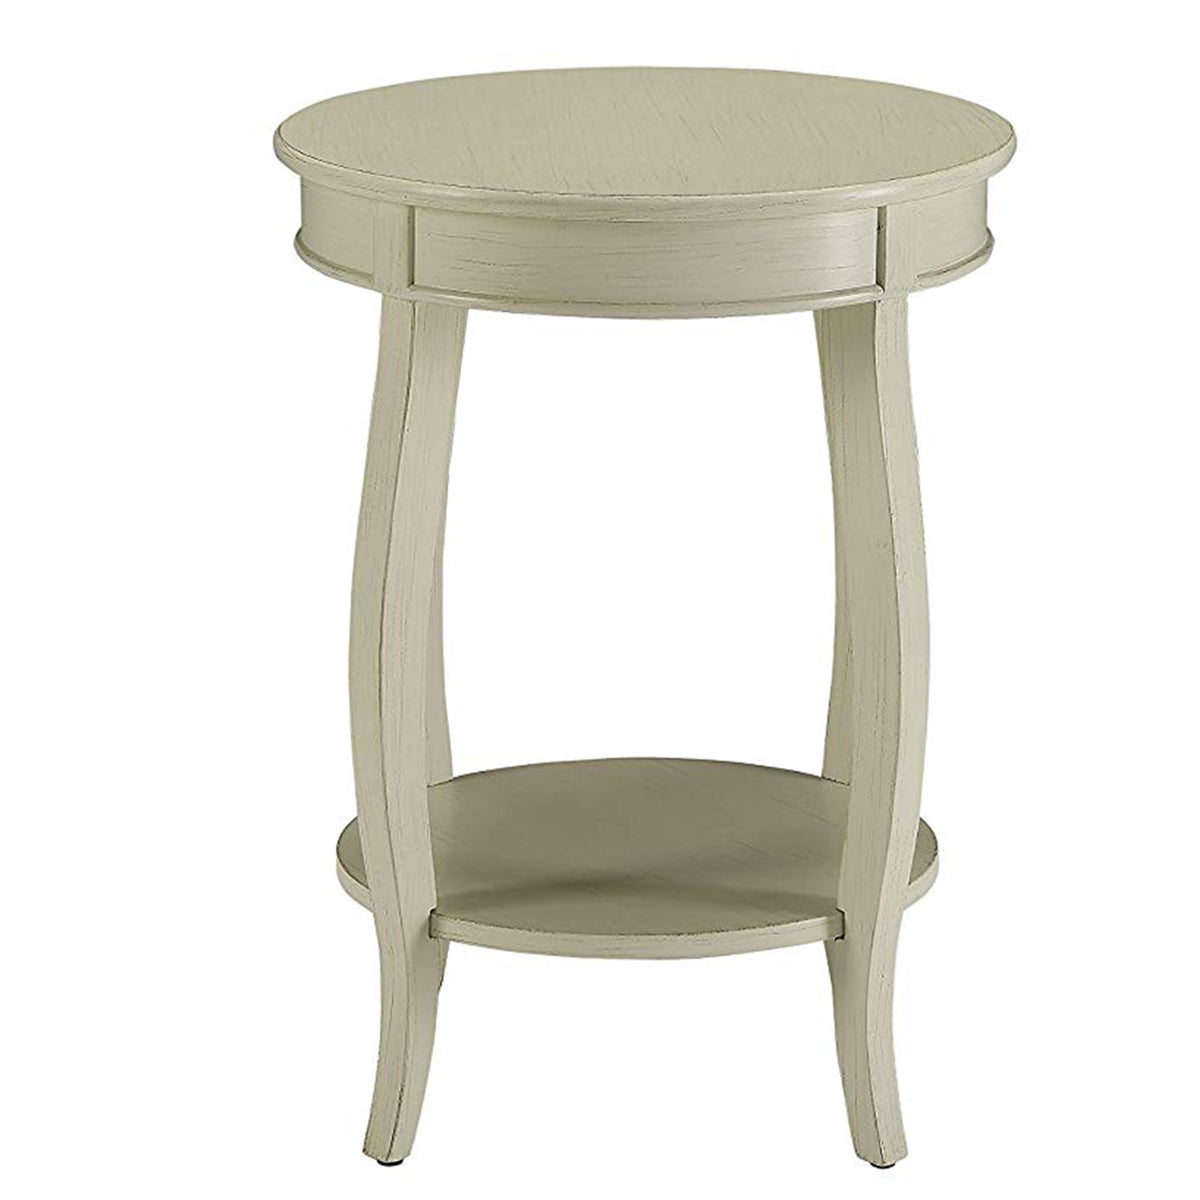 24 Inch Round Side Table with Open Bottom Shelf, White - BM157288